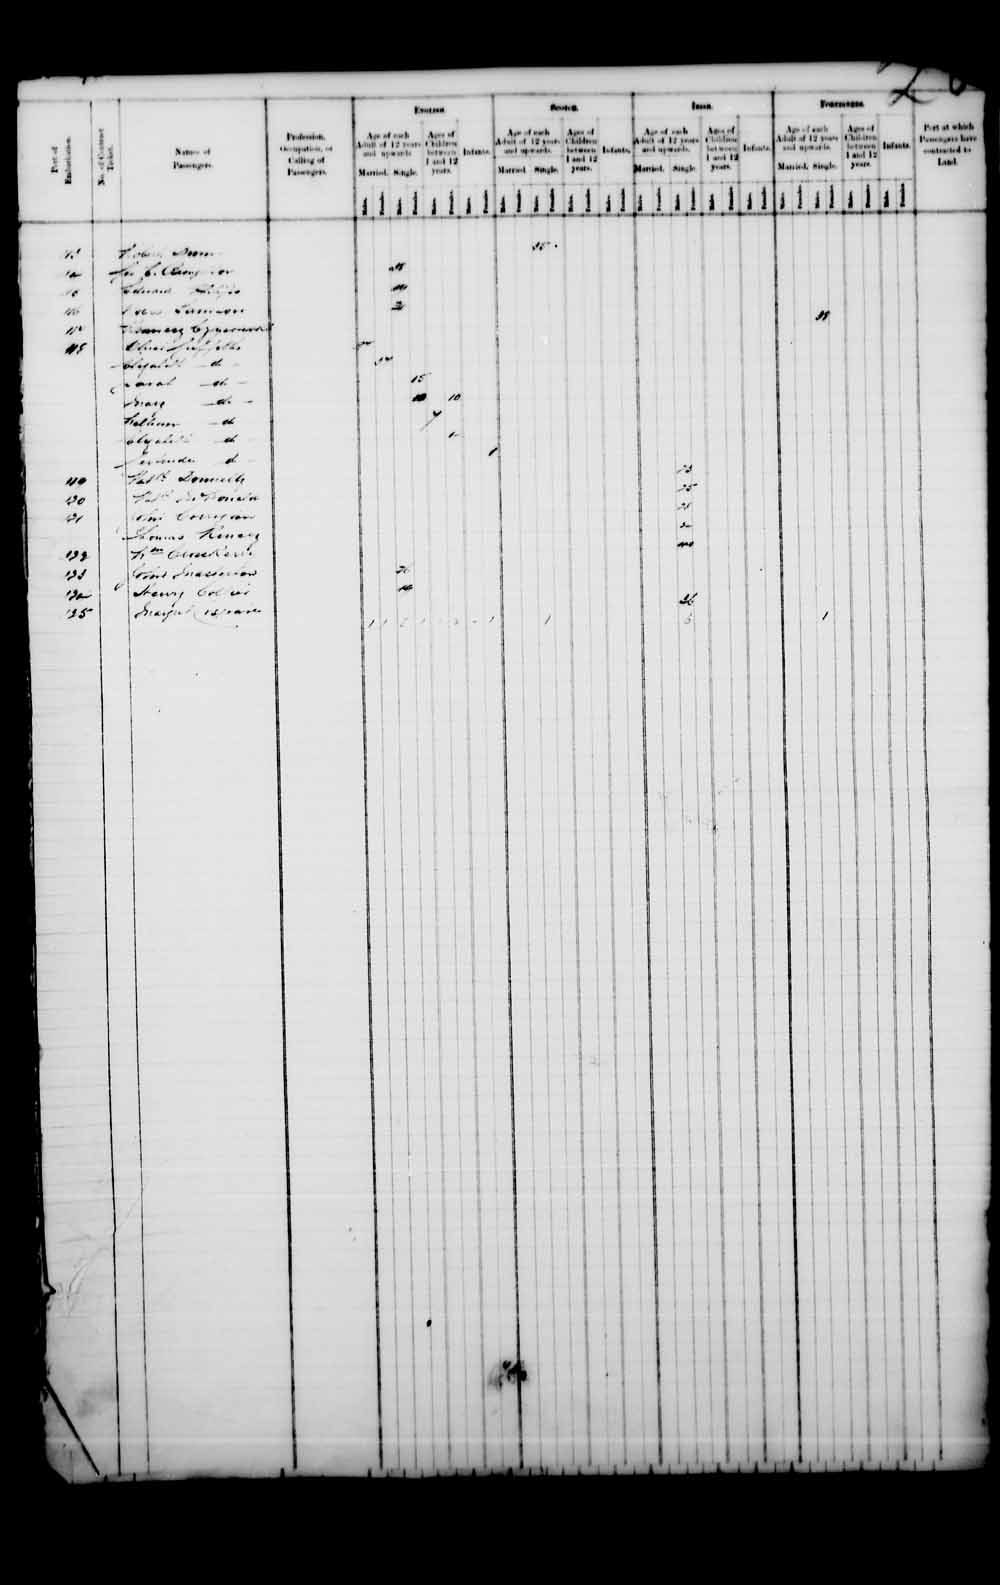 Digitized page of Passenger Lists for Image No.: e003541619